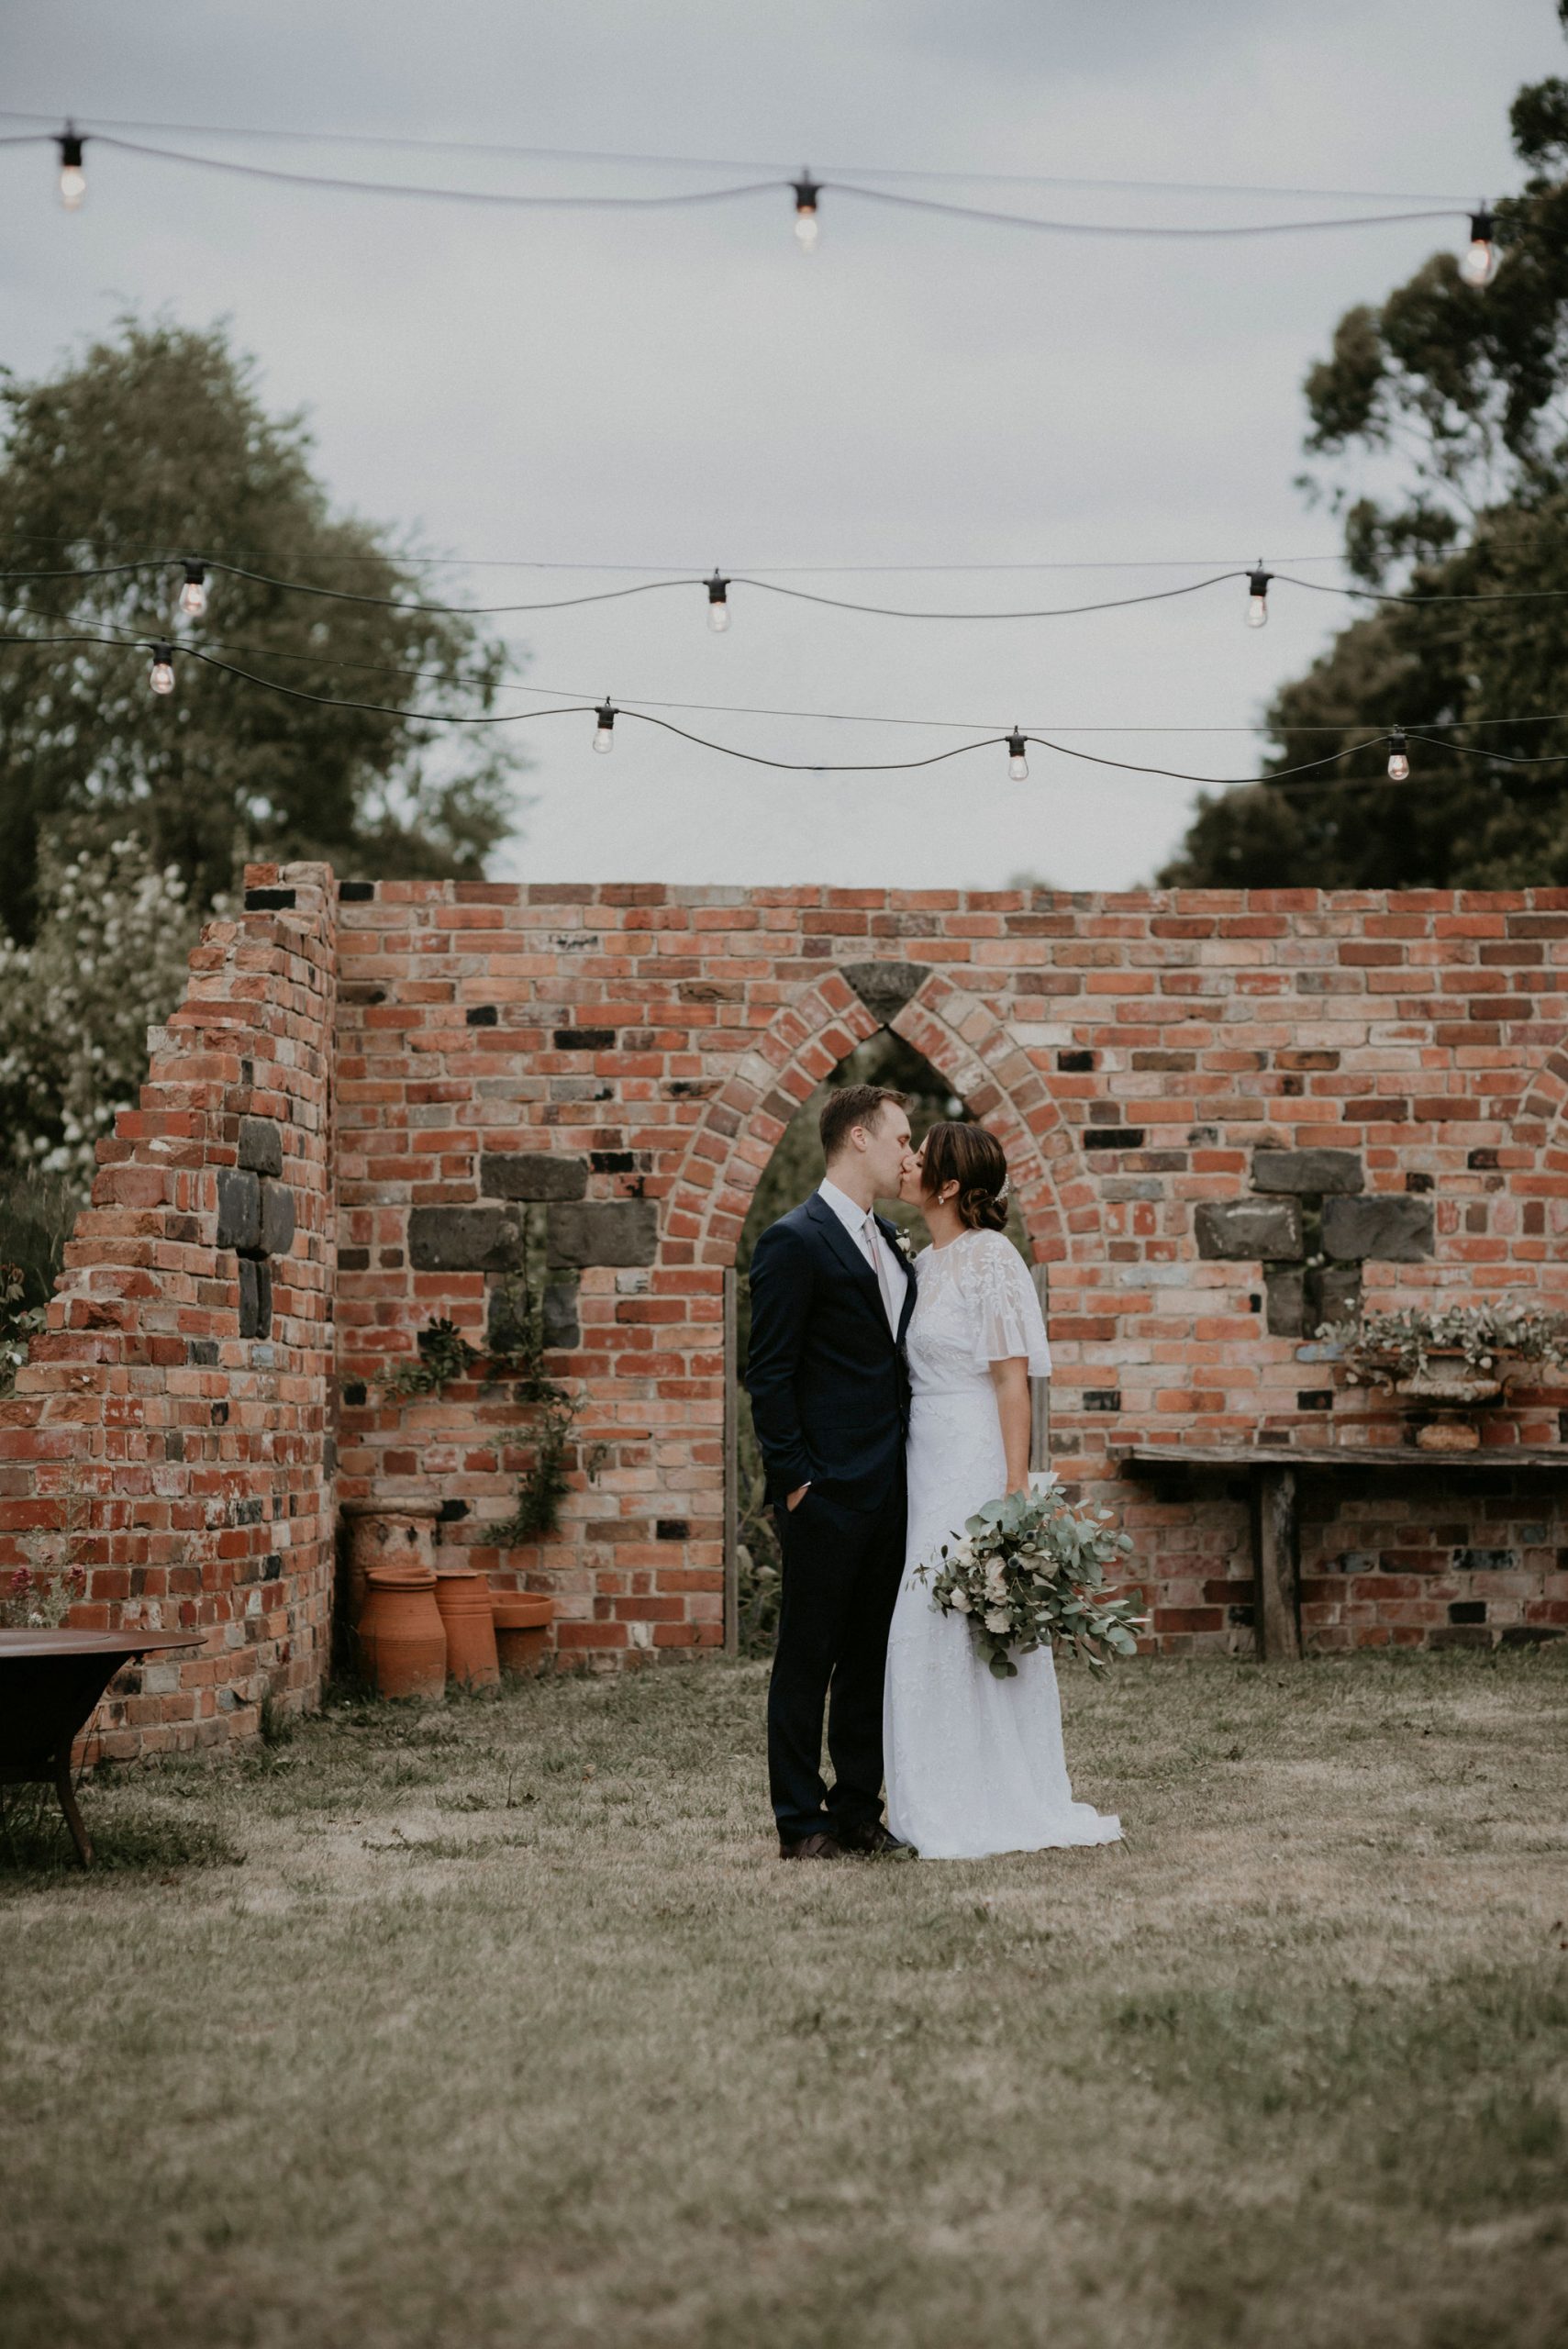 Couple kiss in front of brick wall arch with fairy lights Let's Elope Melbourne Portfolio Celebrant Photographer Elopement Packages Victoria Sarah Matler Photography intimate weddings Acre of Roses Trentham romantic ceremony